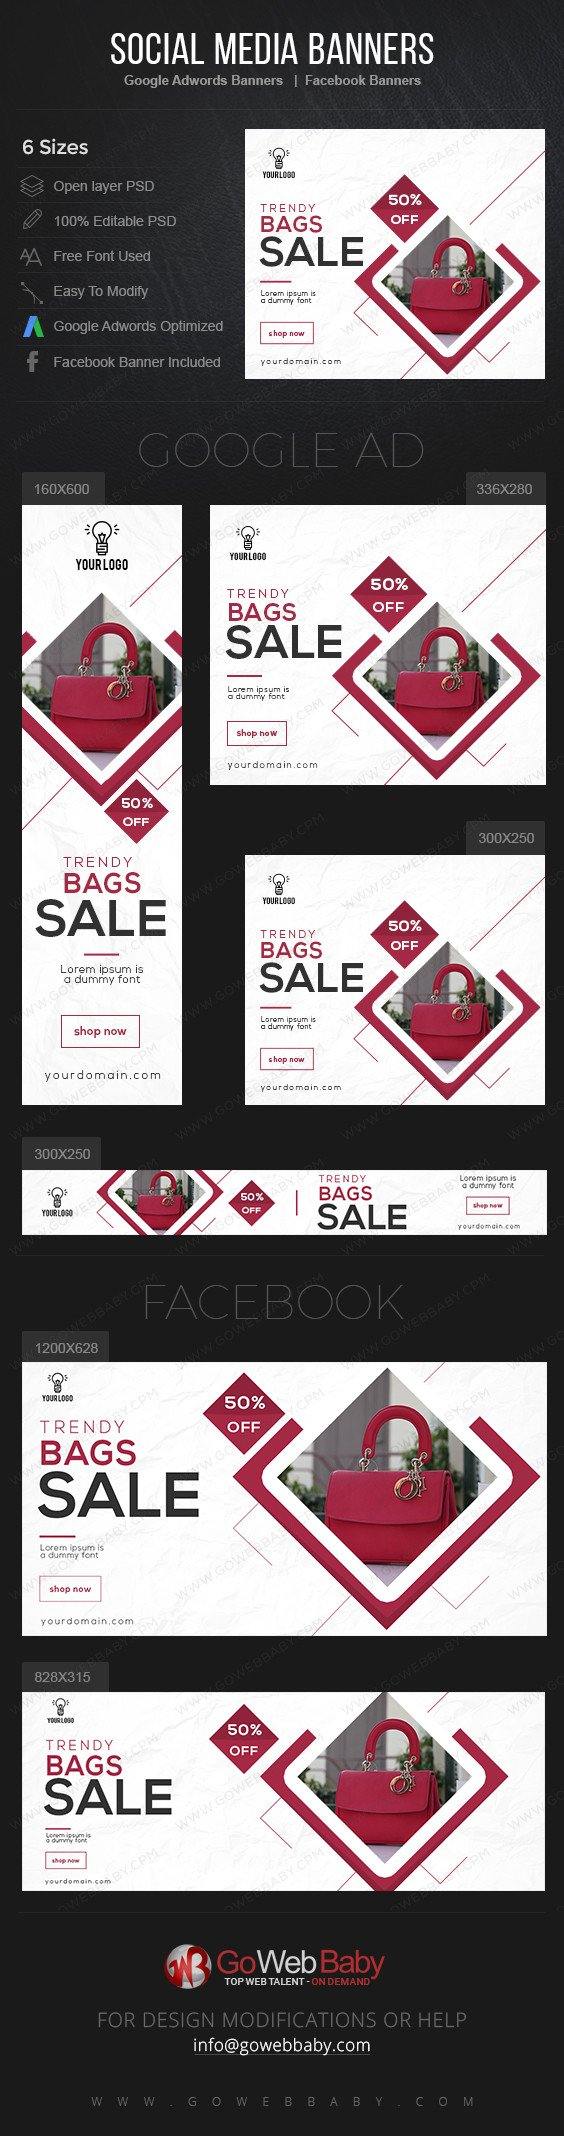 Google Adwords Display Banner With Facebook Banners - Stylish Bags Boutique For Website Marketing - GoWebBaby.Com